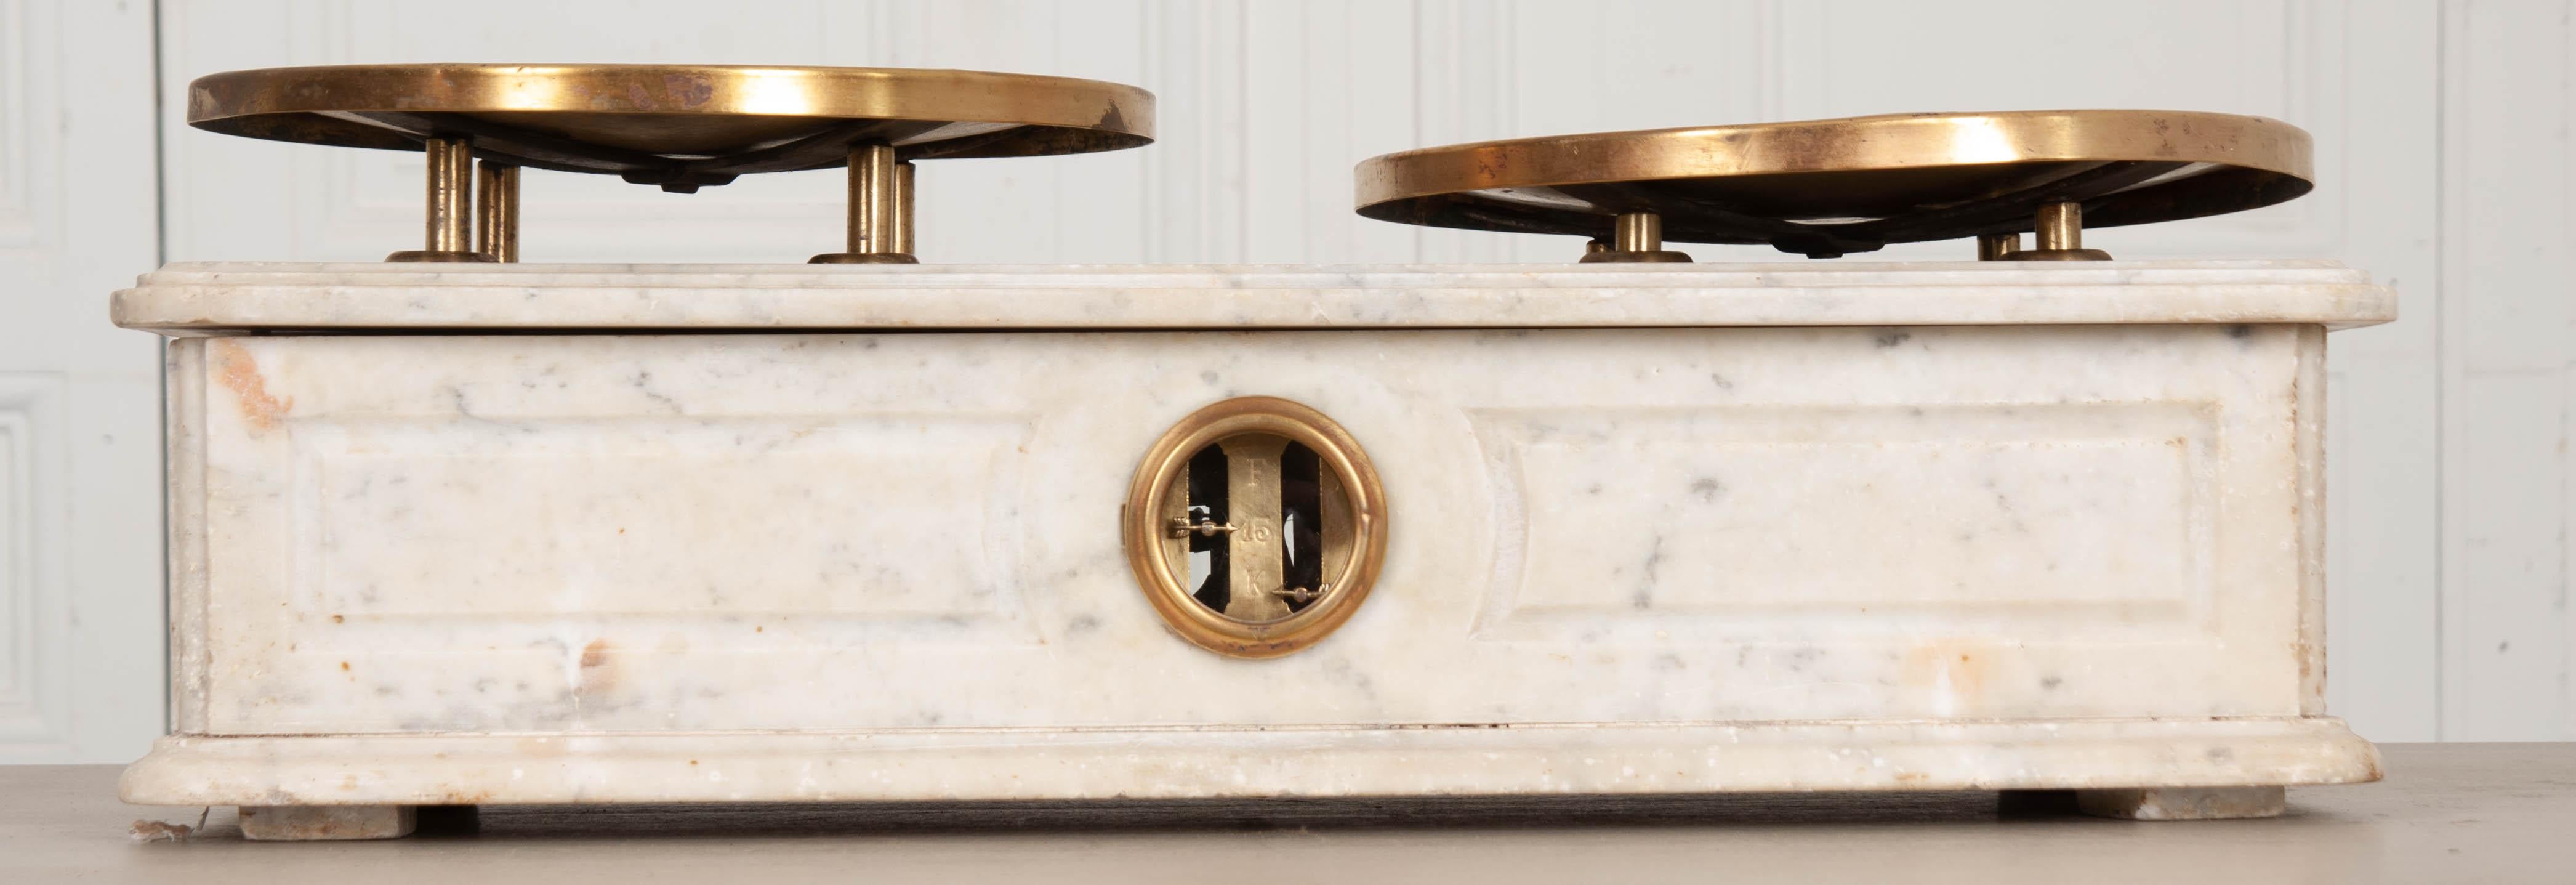 An amazing 19th century French culinary scale, made of marble, with original brass plateaux. The plateaux are handsomely patinated and bear numerous stamps, left by officials at previous occasions when the machine was calibrated. The scale is made